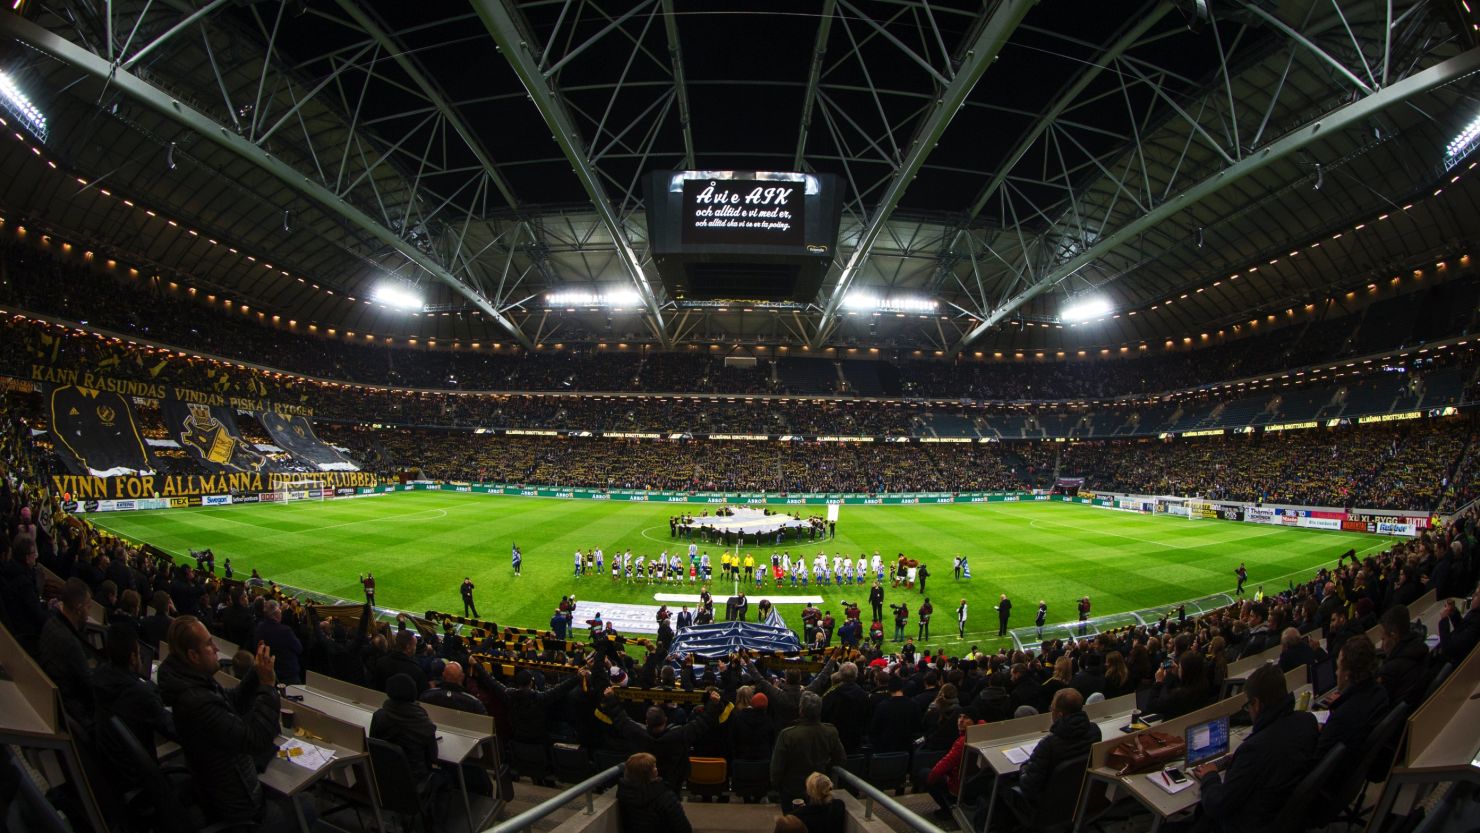 The home ground of AIK is the Friends Arena in Stockholm, Sweden. 